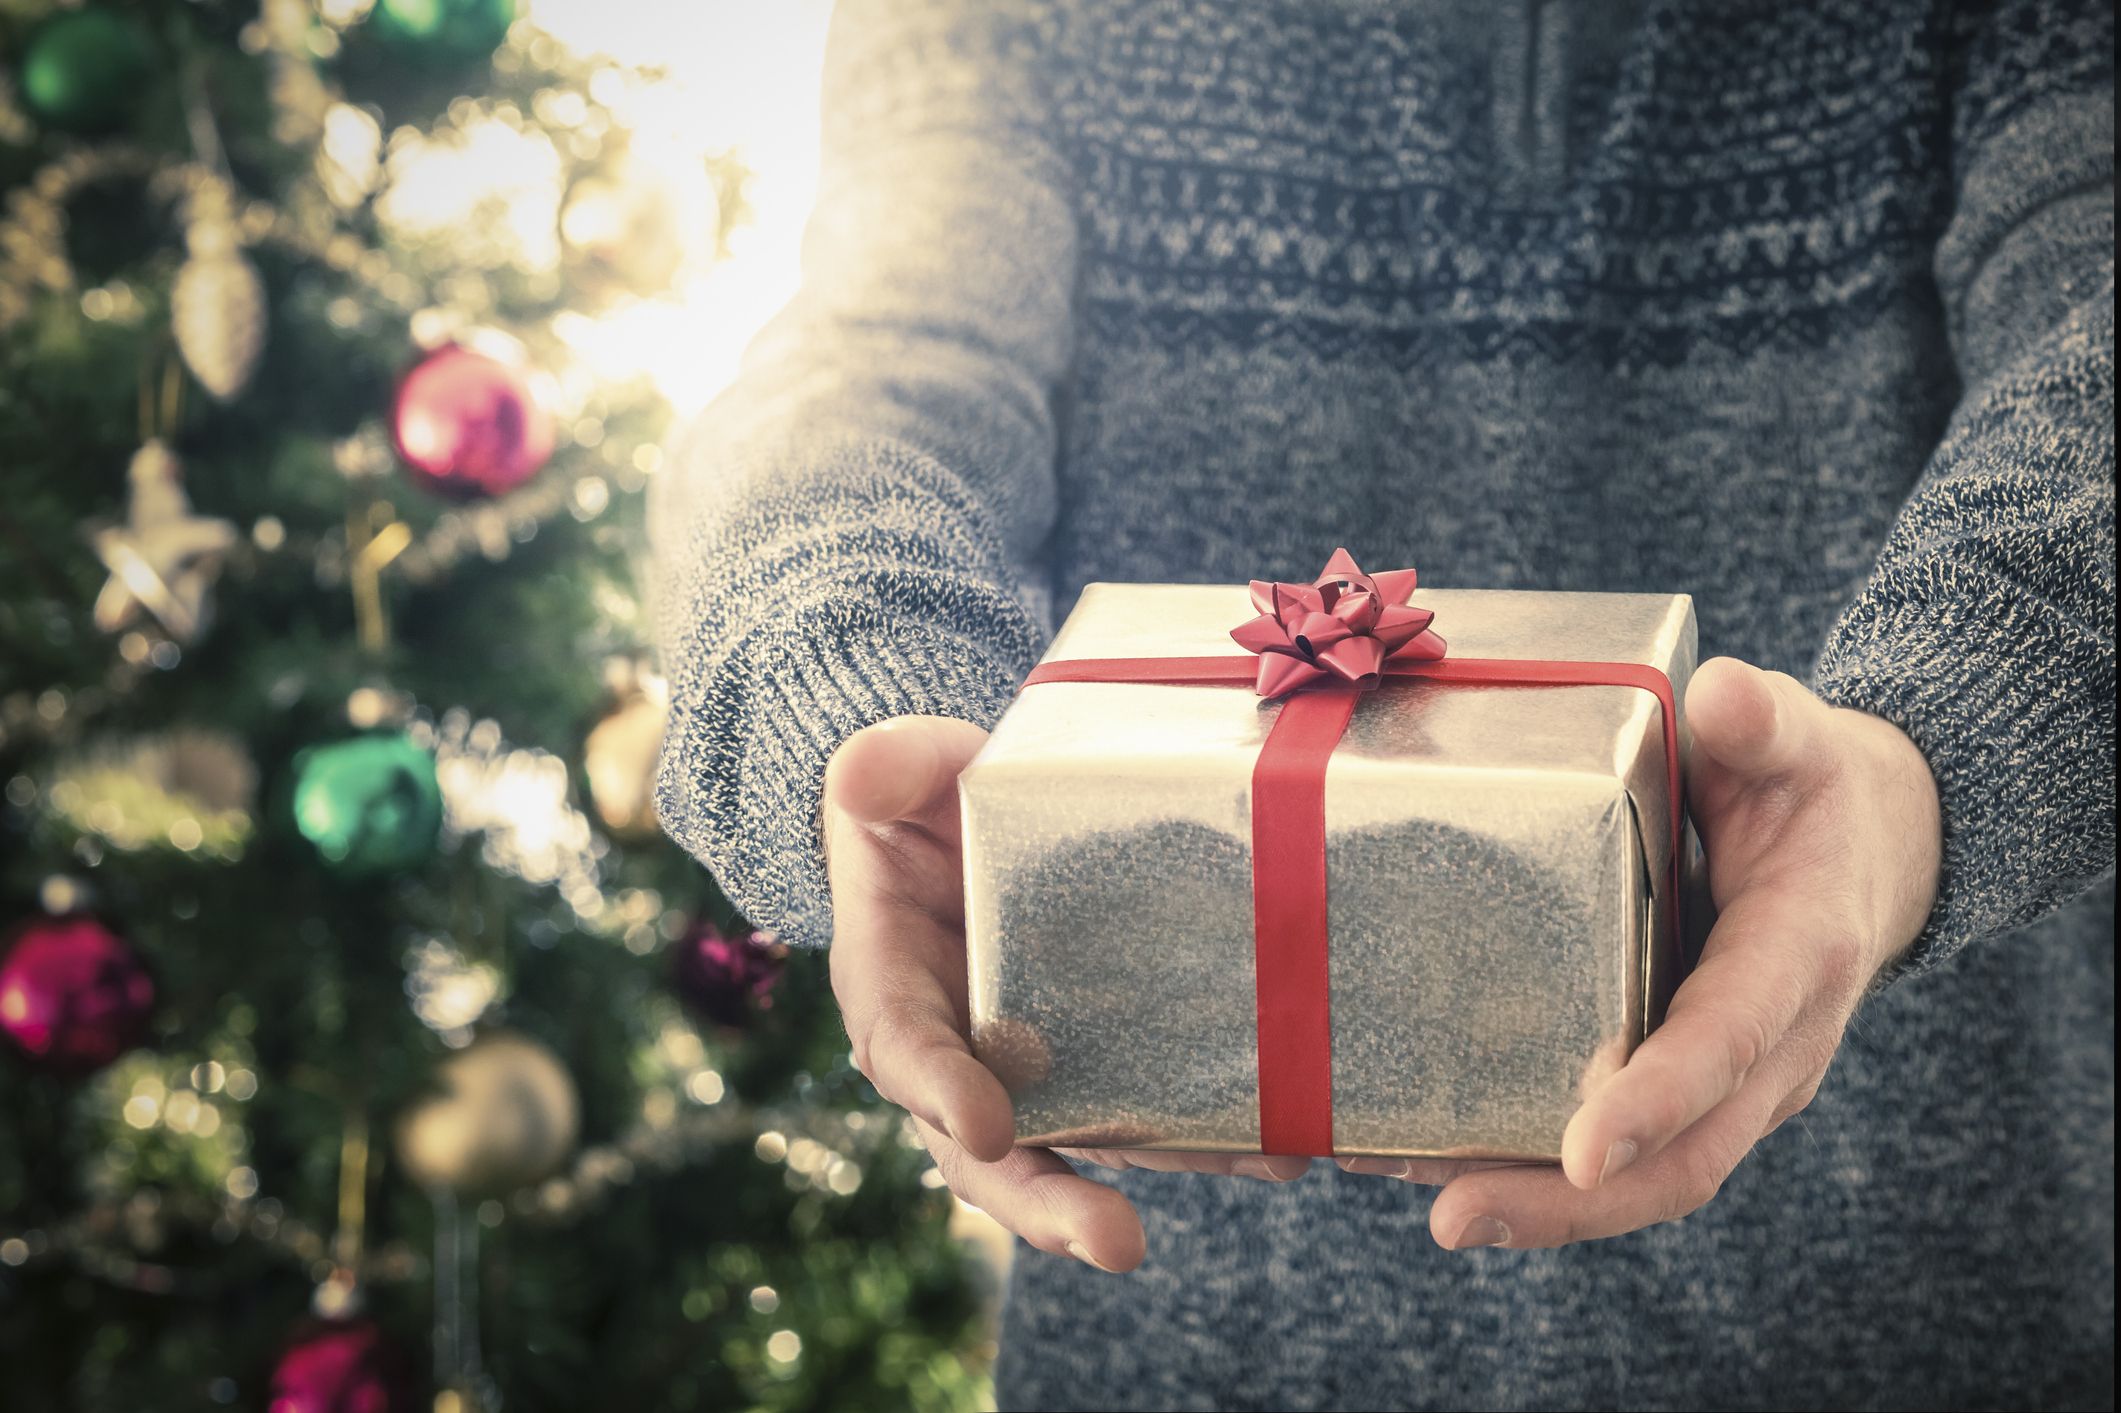 Should You Give Your Coworkers Holiday Gifts? Experts Weigh In